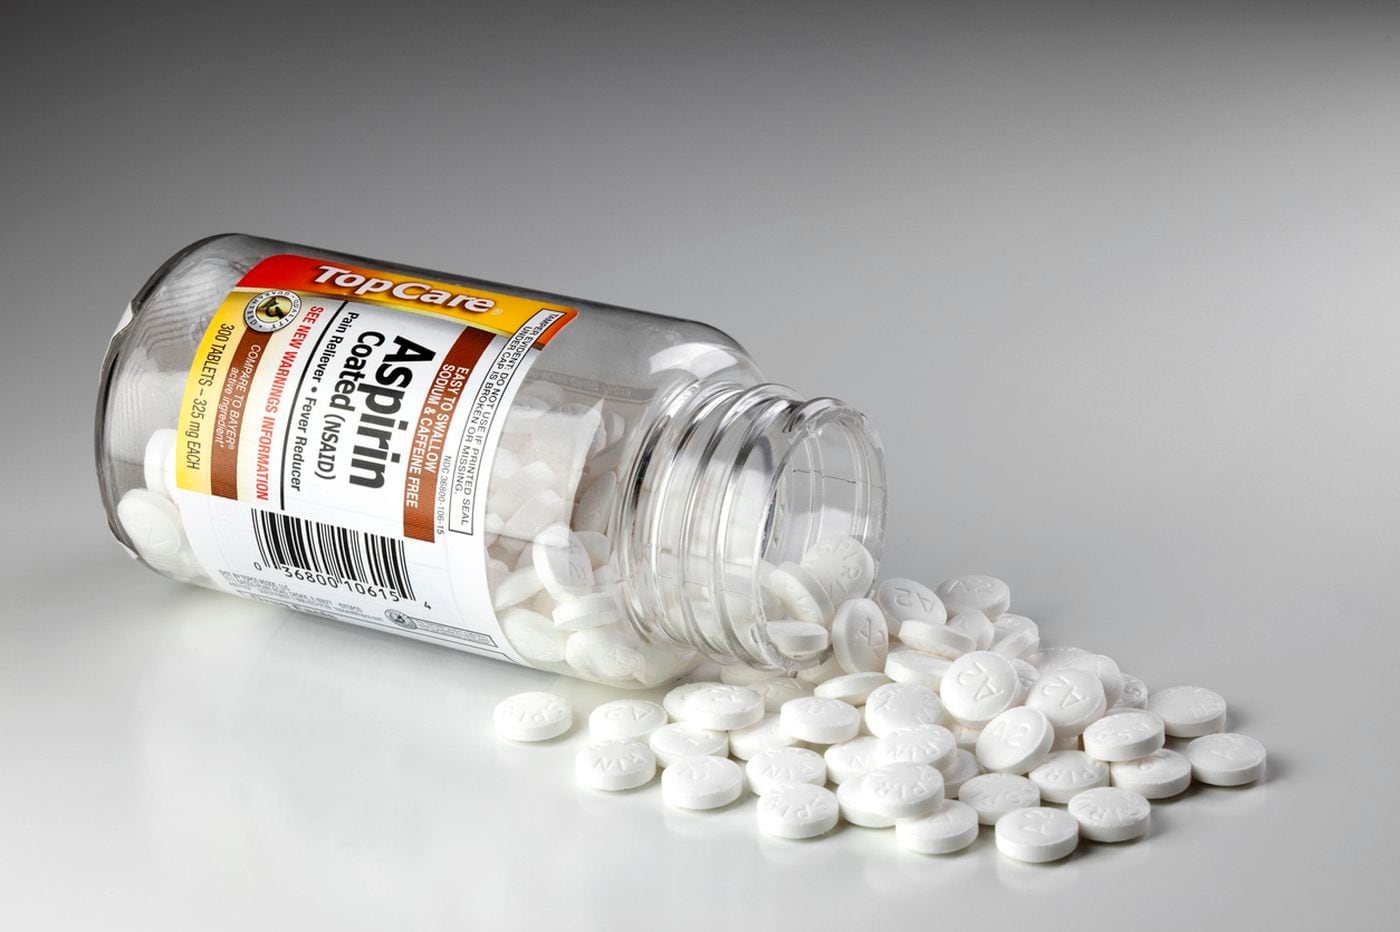 A cardiologist explains who should (and should not) take daily preventive aspirin